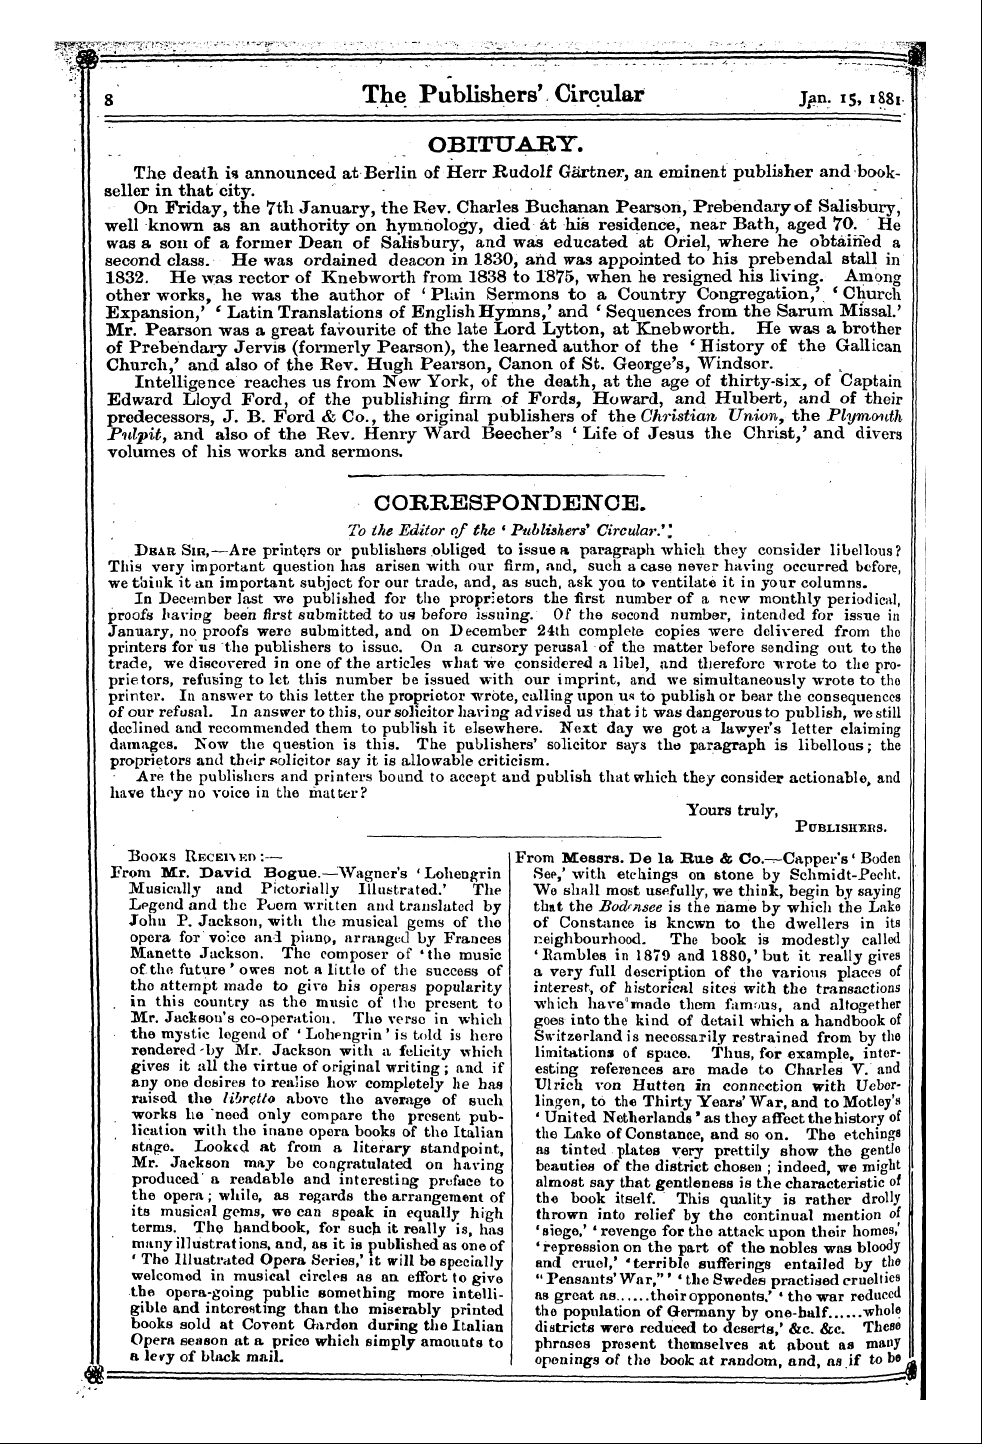 Publishers’ Circular (1880-1890): jS F Y, 1st edition - Obituaby.